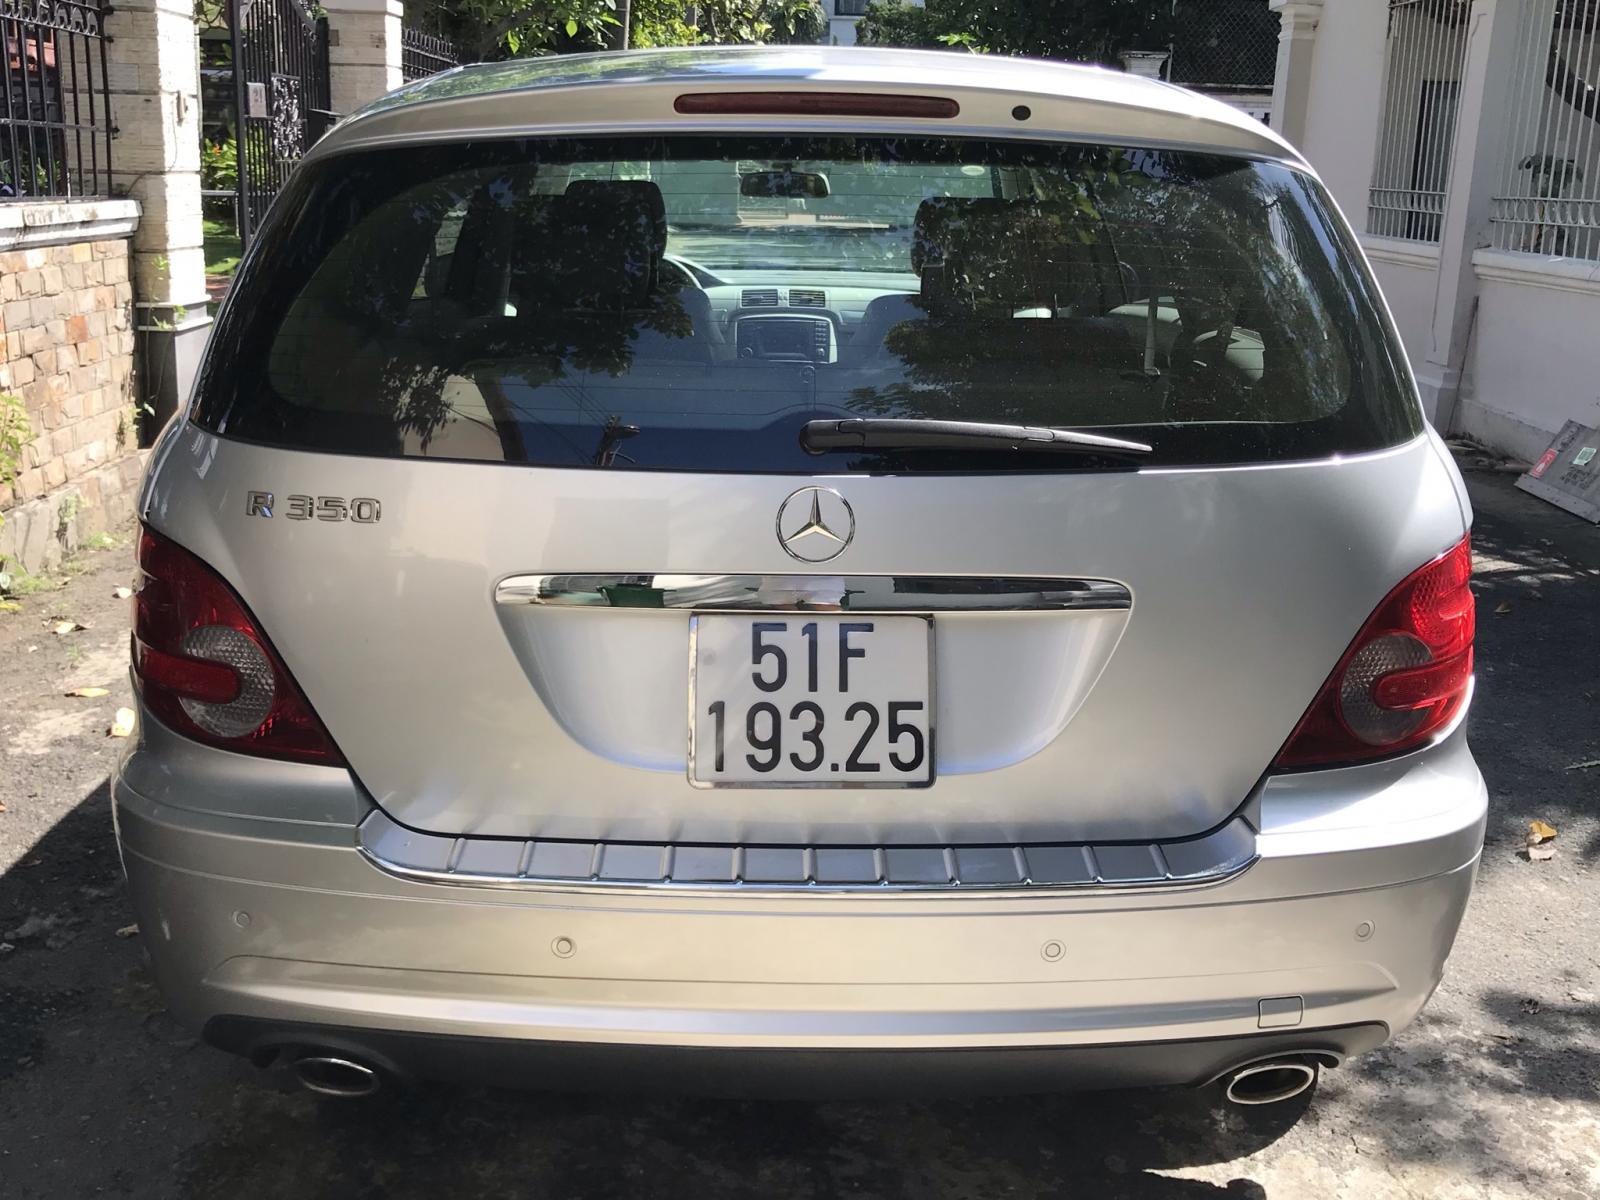 Mercedes-Benz R class R350 2008 - Selling 2008 Mercedes R350 car, silver color, price 400 million VND